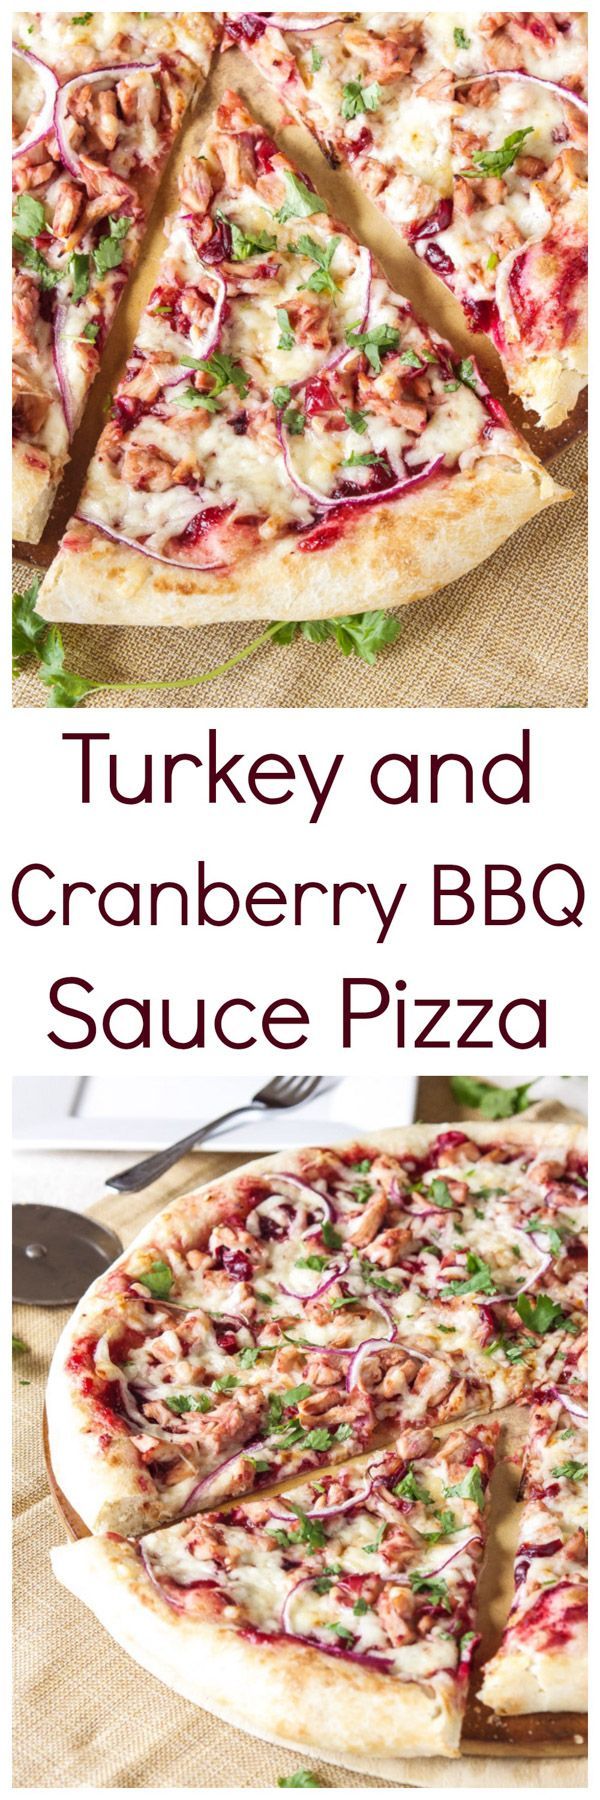 Turkey and Cranberry BBQ Sauce Pizza